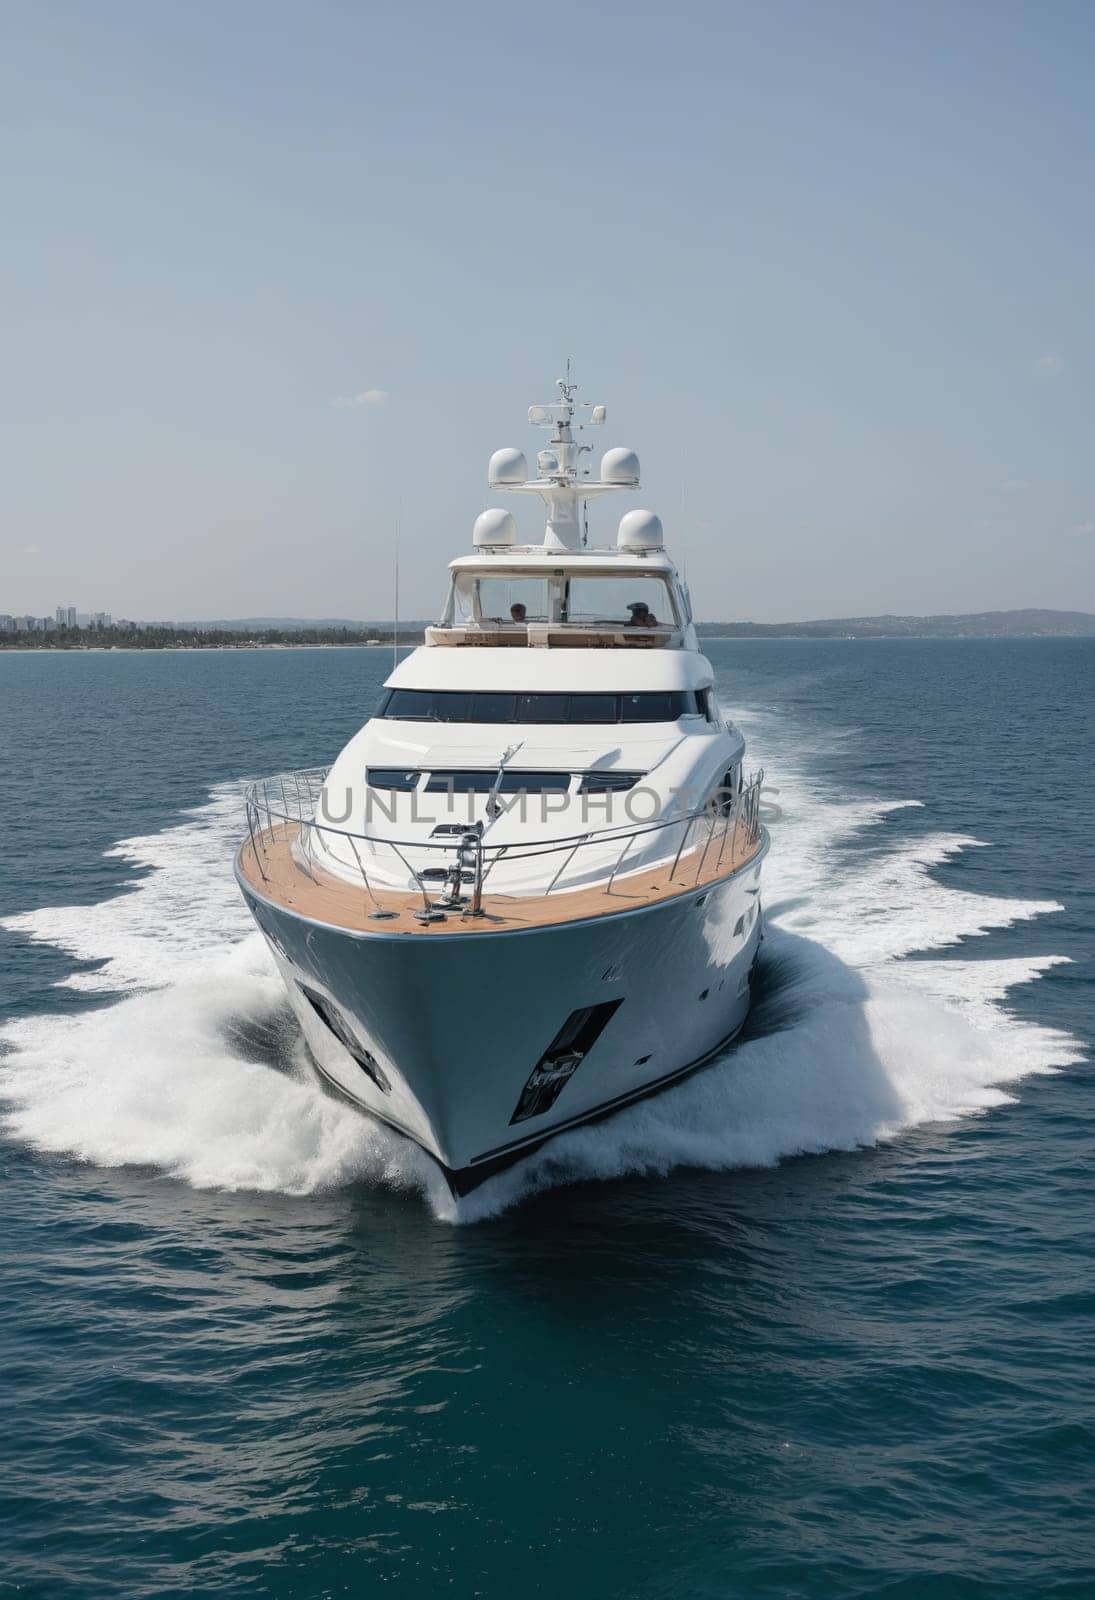 A luxurious yacht makes its way across serene seas under a clear sky, epitomizing elegance and adventure.